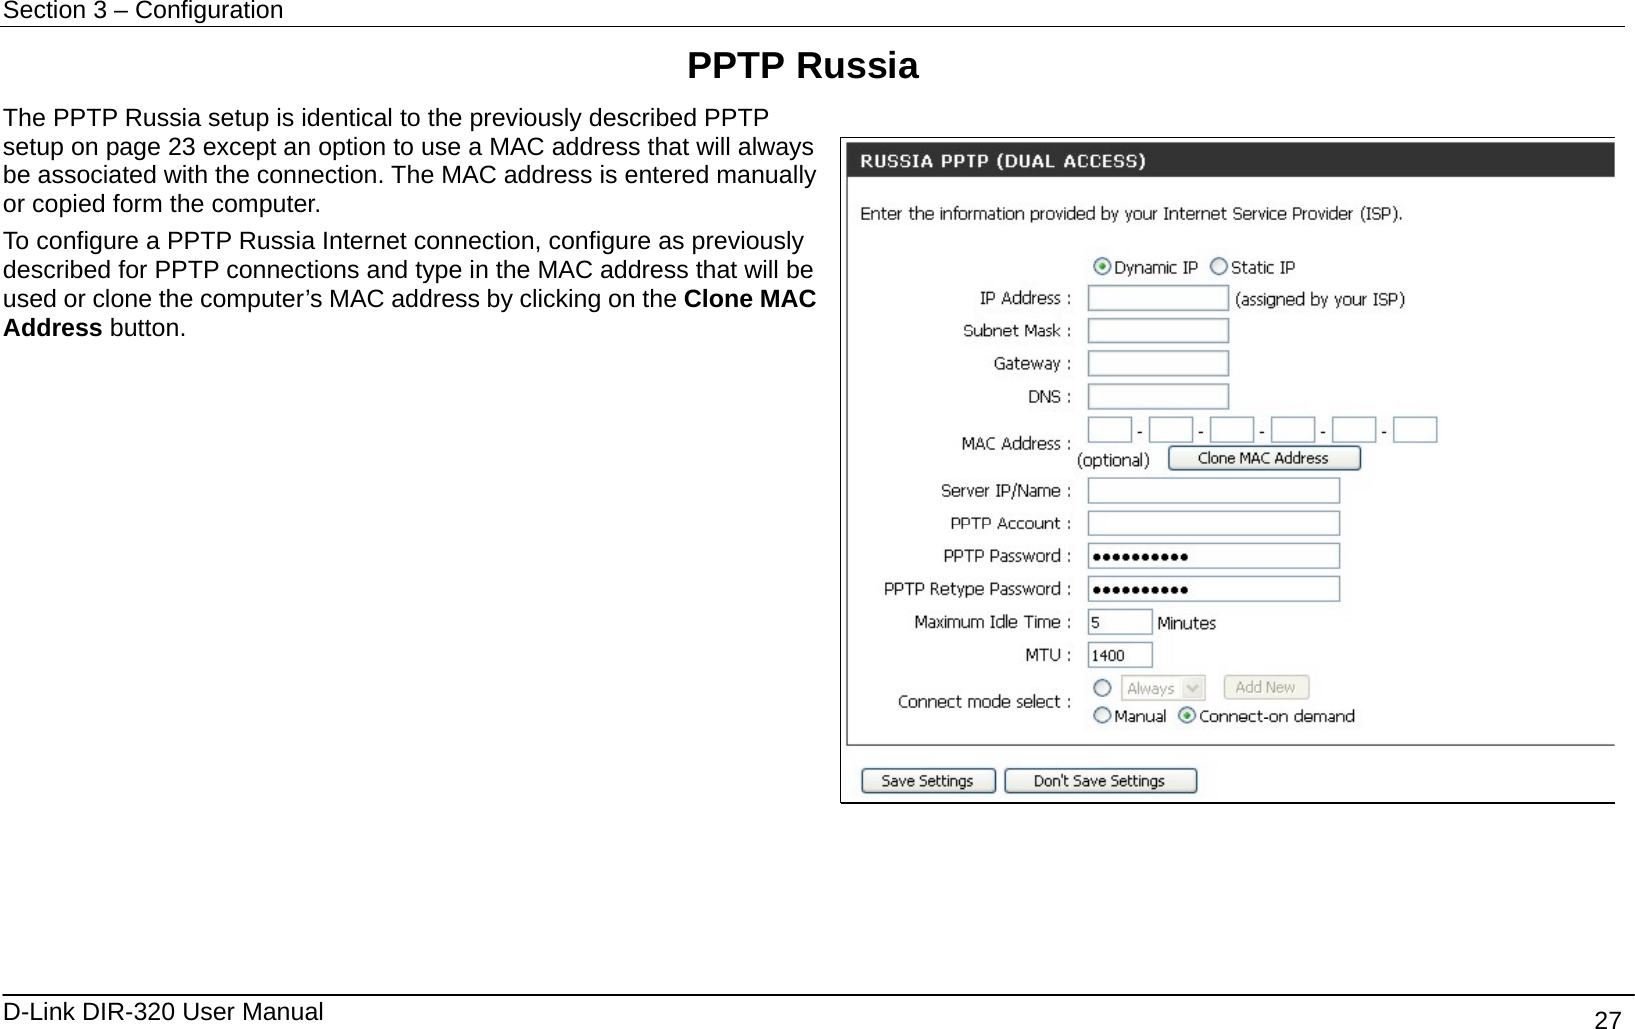 Section 3 – Configuration   D-Link DIR-320 User Manual                                       27 PPTP Russia The PPTP Russia setup is identical to the previously described PPTP setup on page 23 except an option to use a MAC address that will always be associated with the connection. The MAC address is entered manually or copied form the computer.     To configure a PPTP Russia Internet connection, configure as previously described for PPTP connections and type in the MAC address that will be used or clone the computer’s MAC address by clicking on the Clone MAC Address button.       